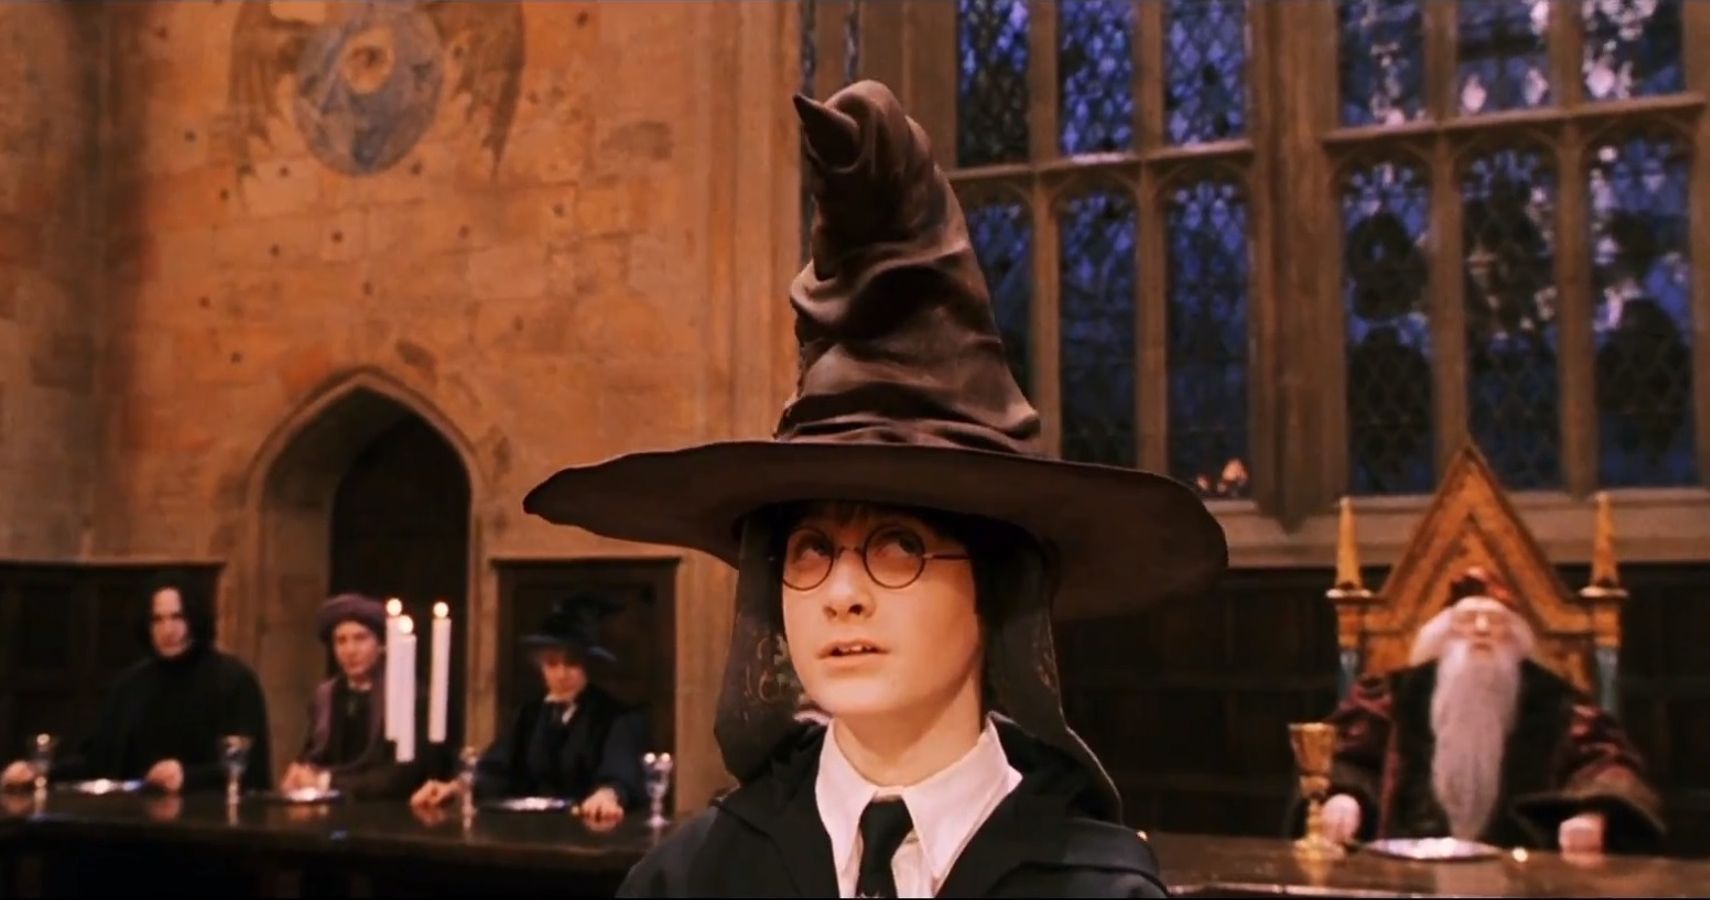 Harry Potter 5 Scenes That Made The Sorcerers Stone Better (And 5 That Made It Worse)